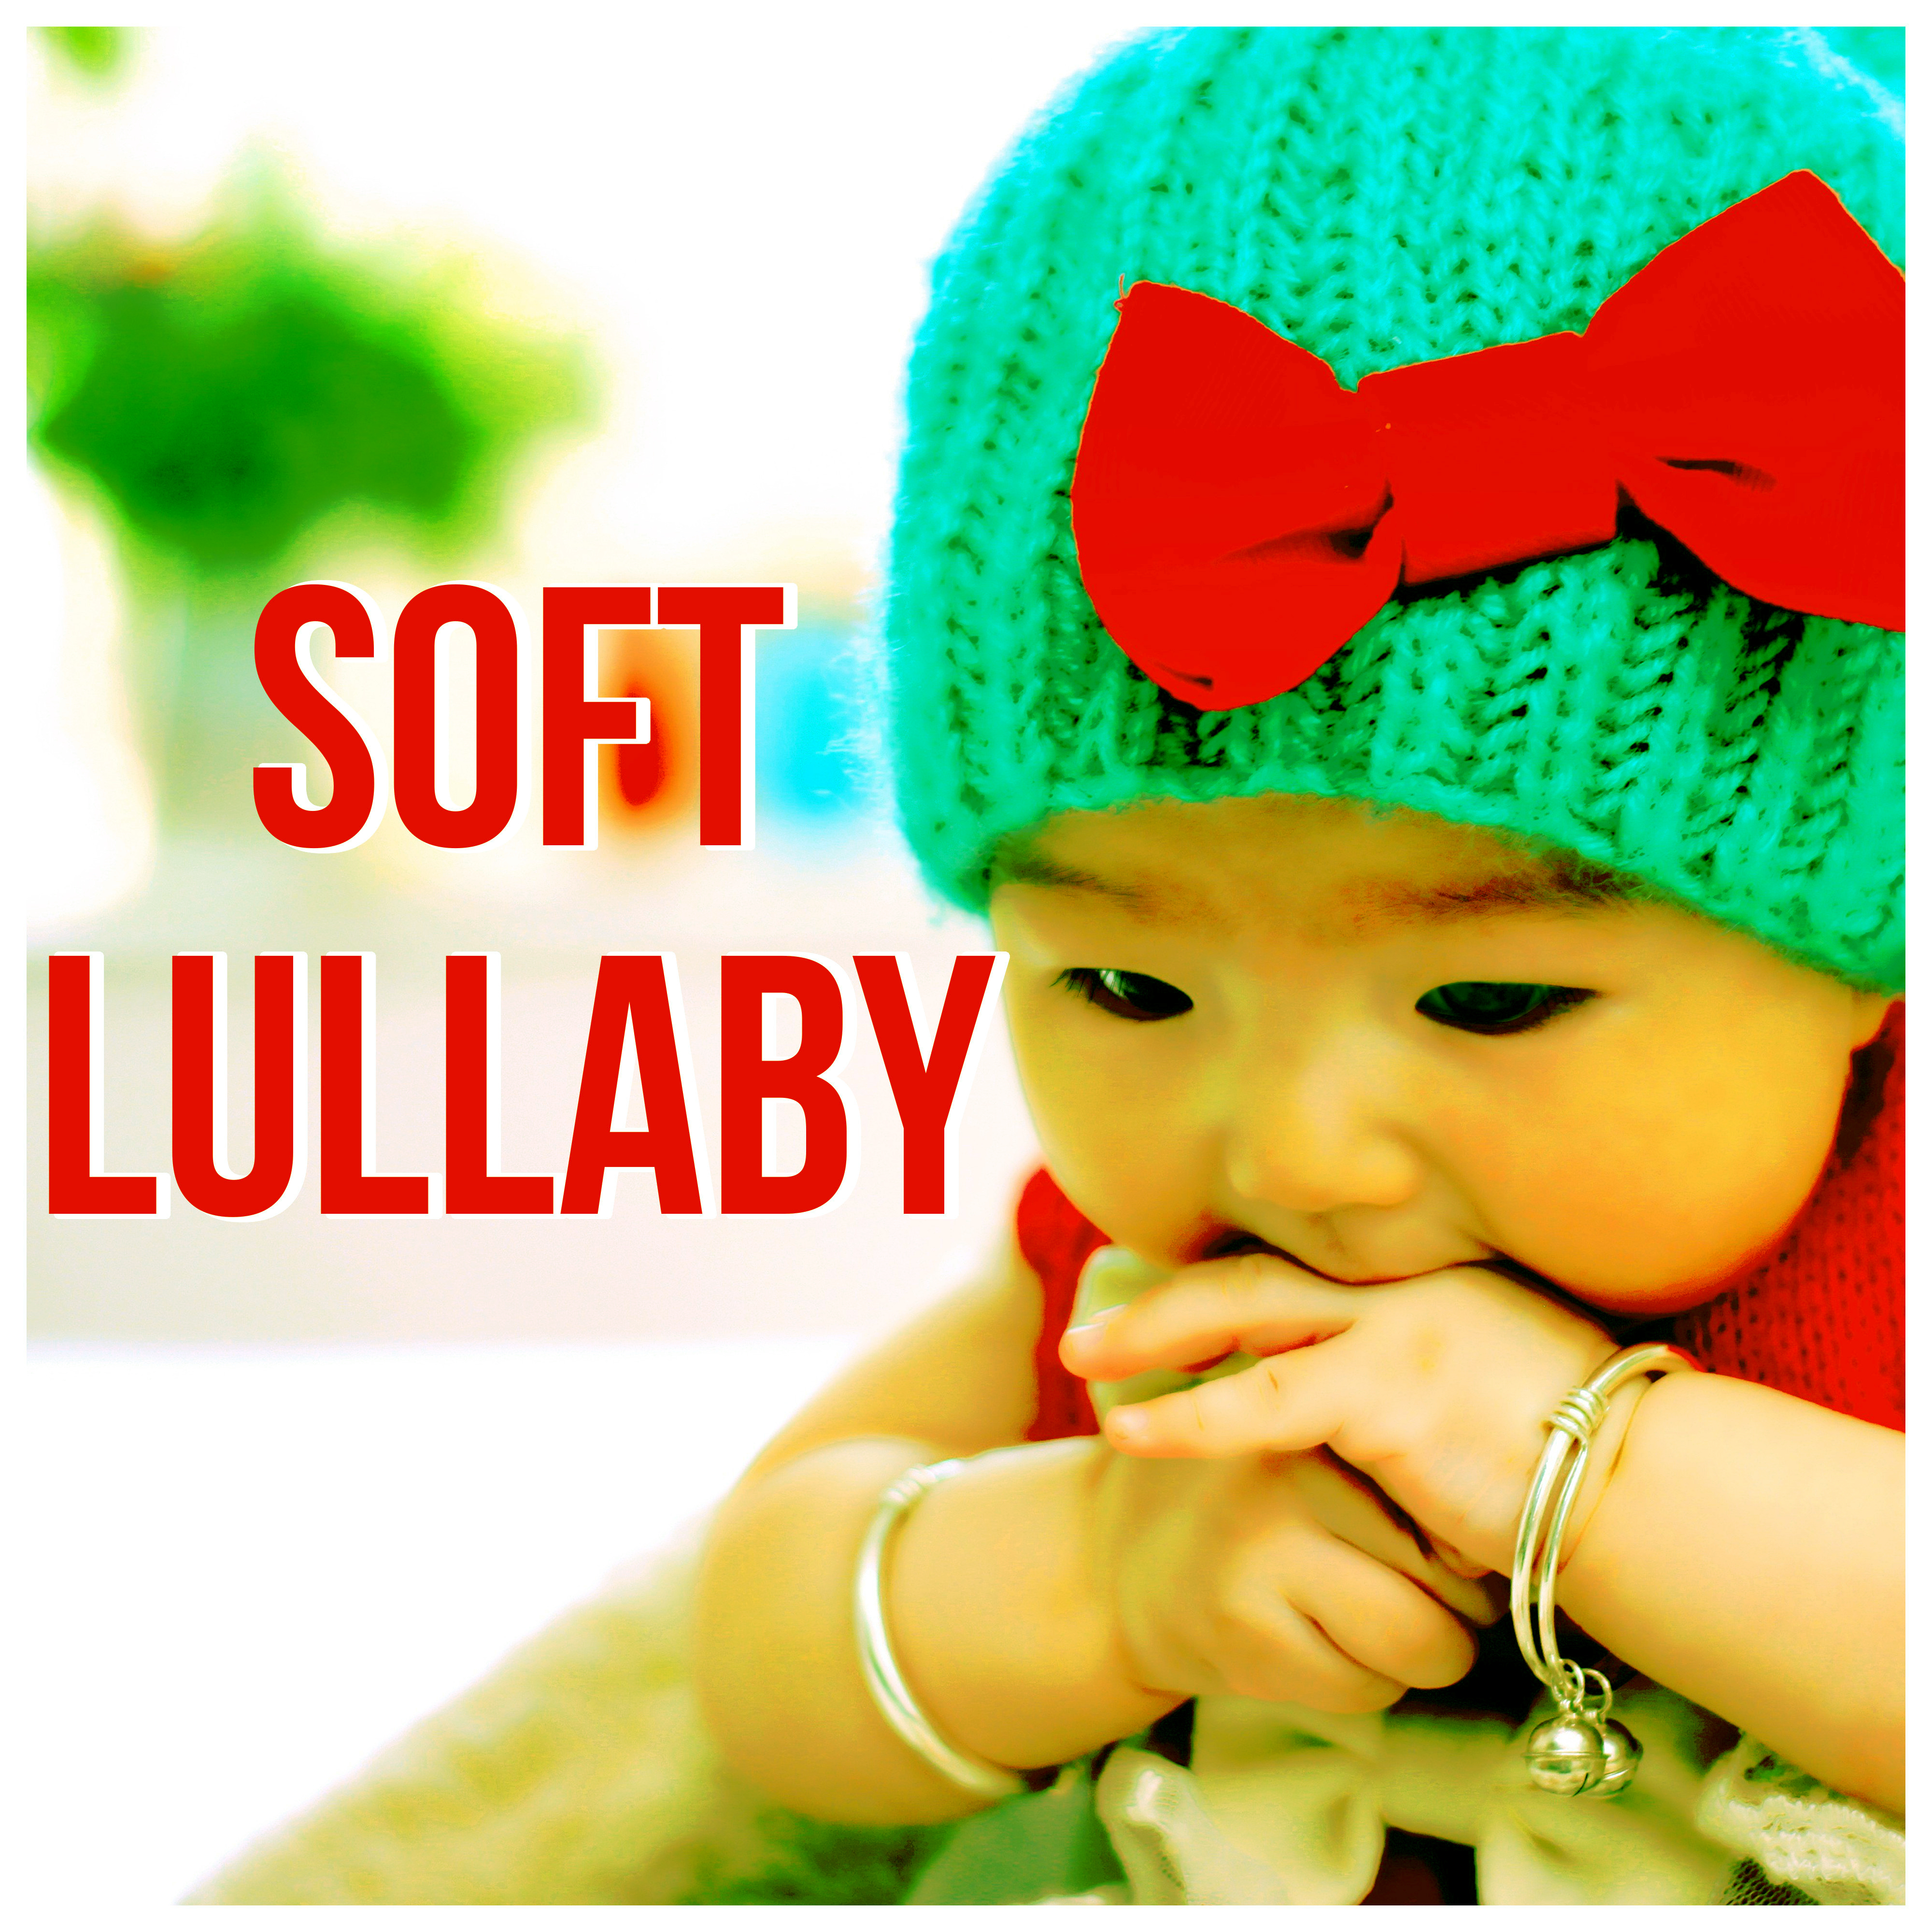 Soft Lullaby  Calming and Quiet Night, Calming Down Melodies, White Noises for Deep Sleep, Beautiful Sleep Music